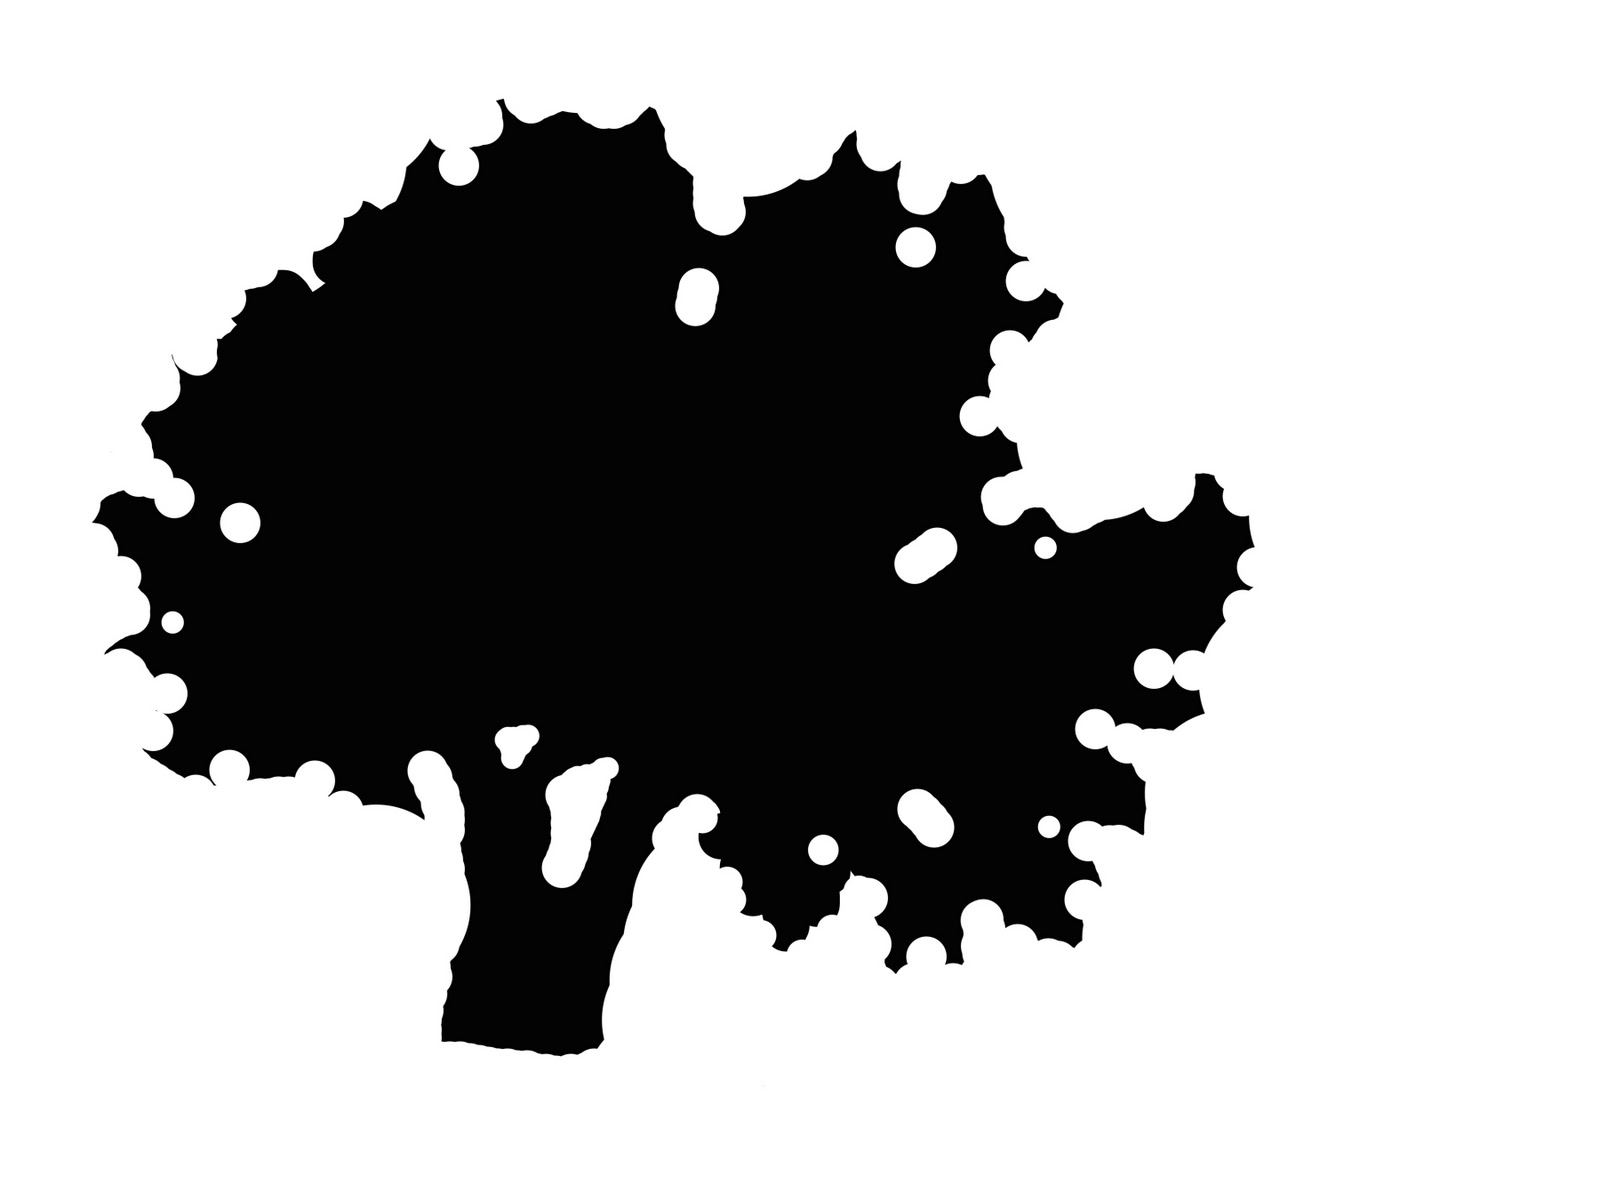 Evergreen Tree Outline Drawing Stylized Negative Trees Class 